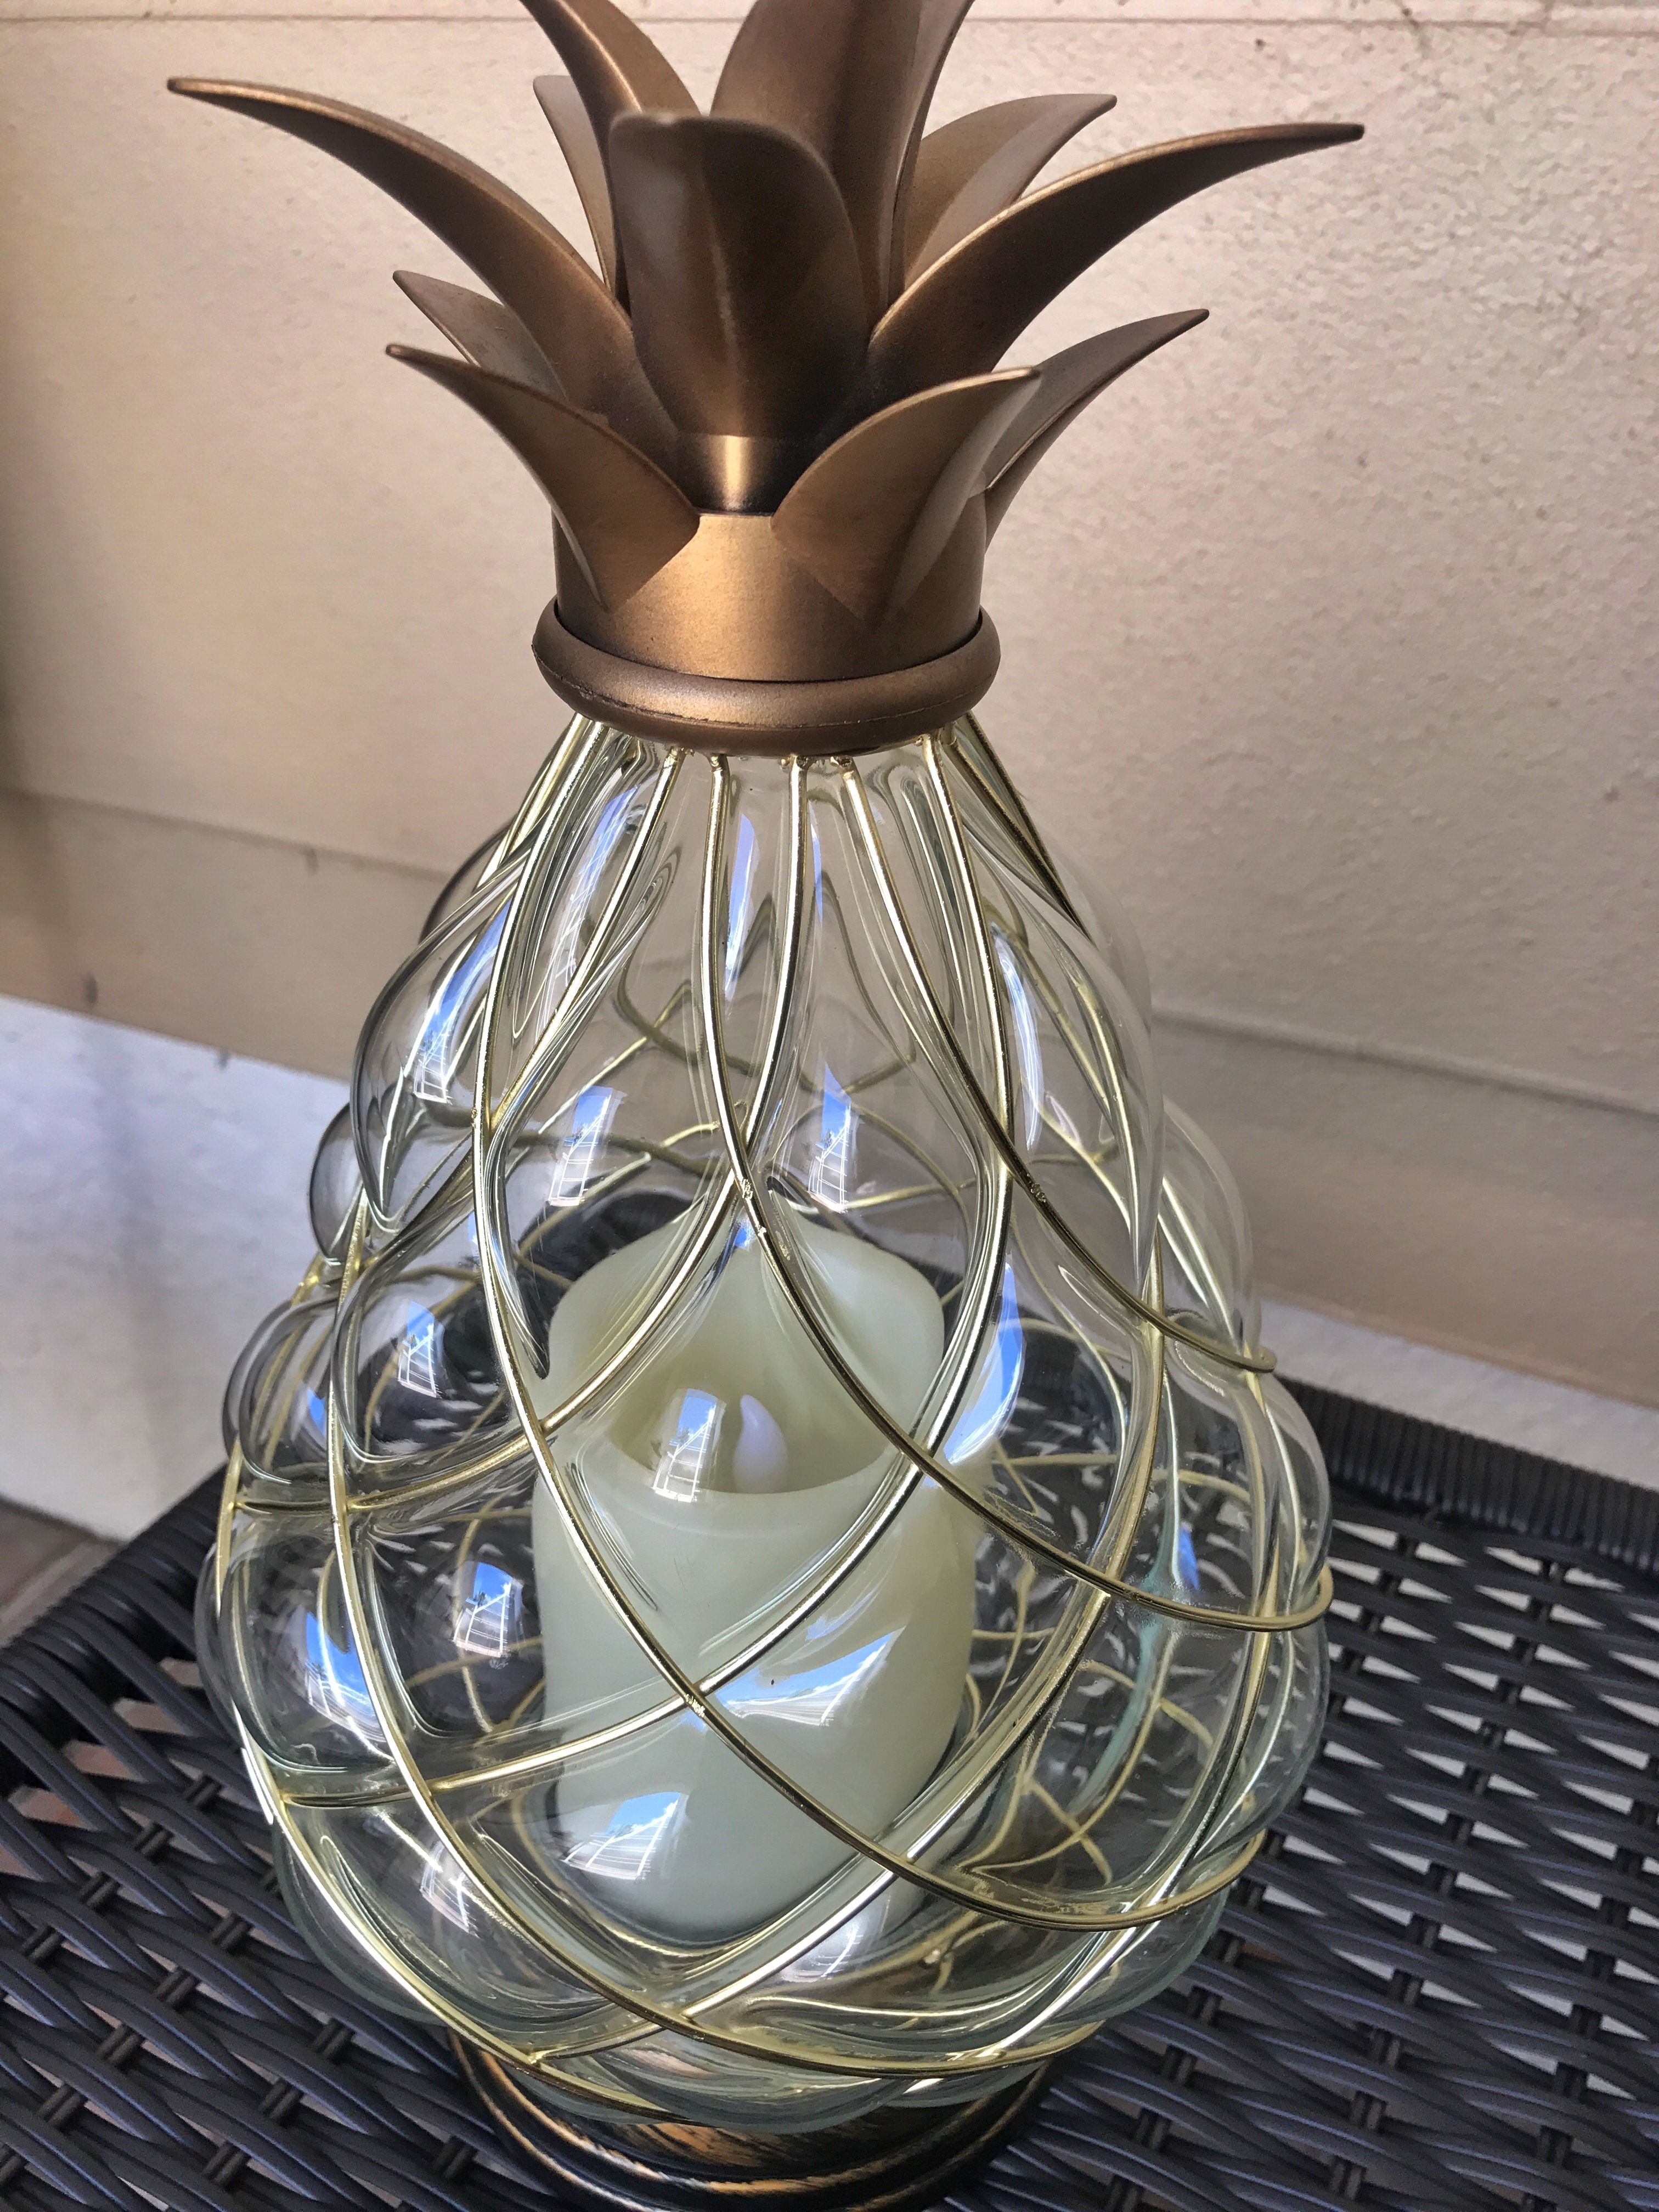 Big Lots Outdoor Lanterns With Most Recent Big Lots Outdoor Lights – Outdoor Lighting Ideas (View 1 of 20)